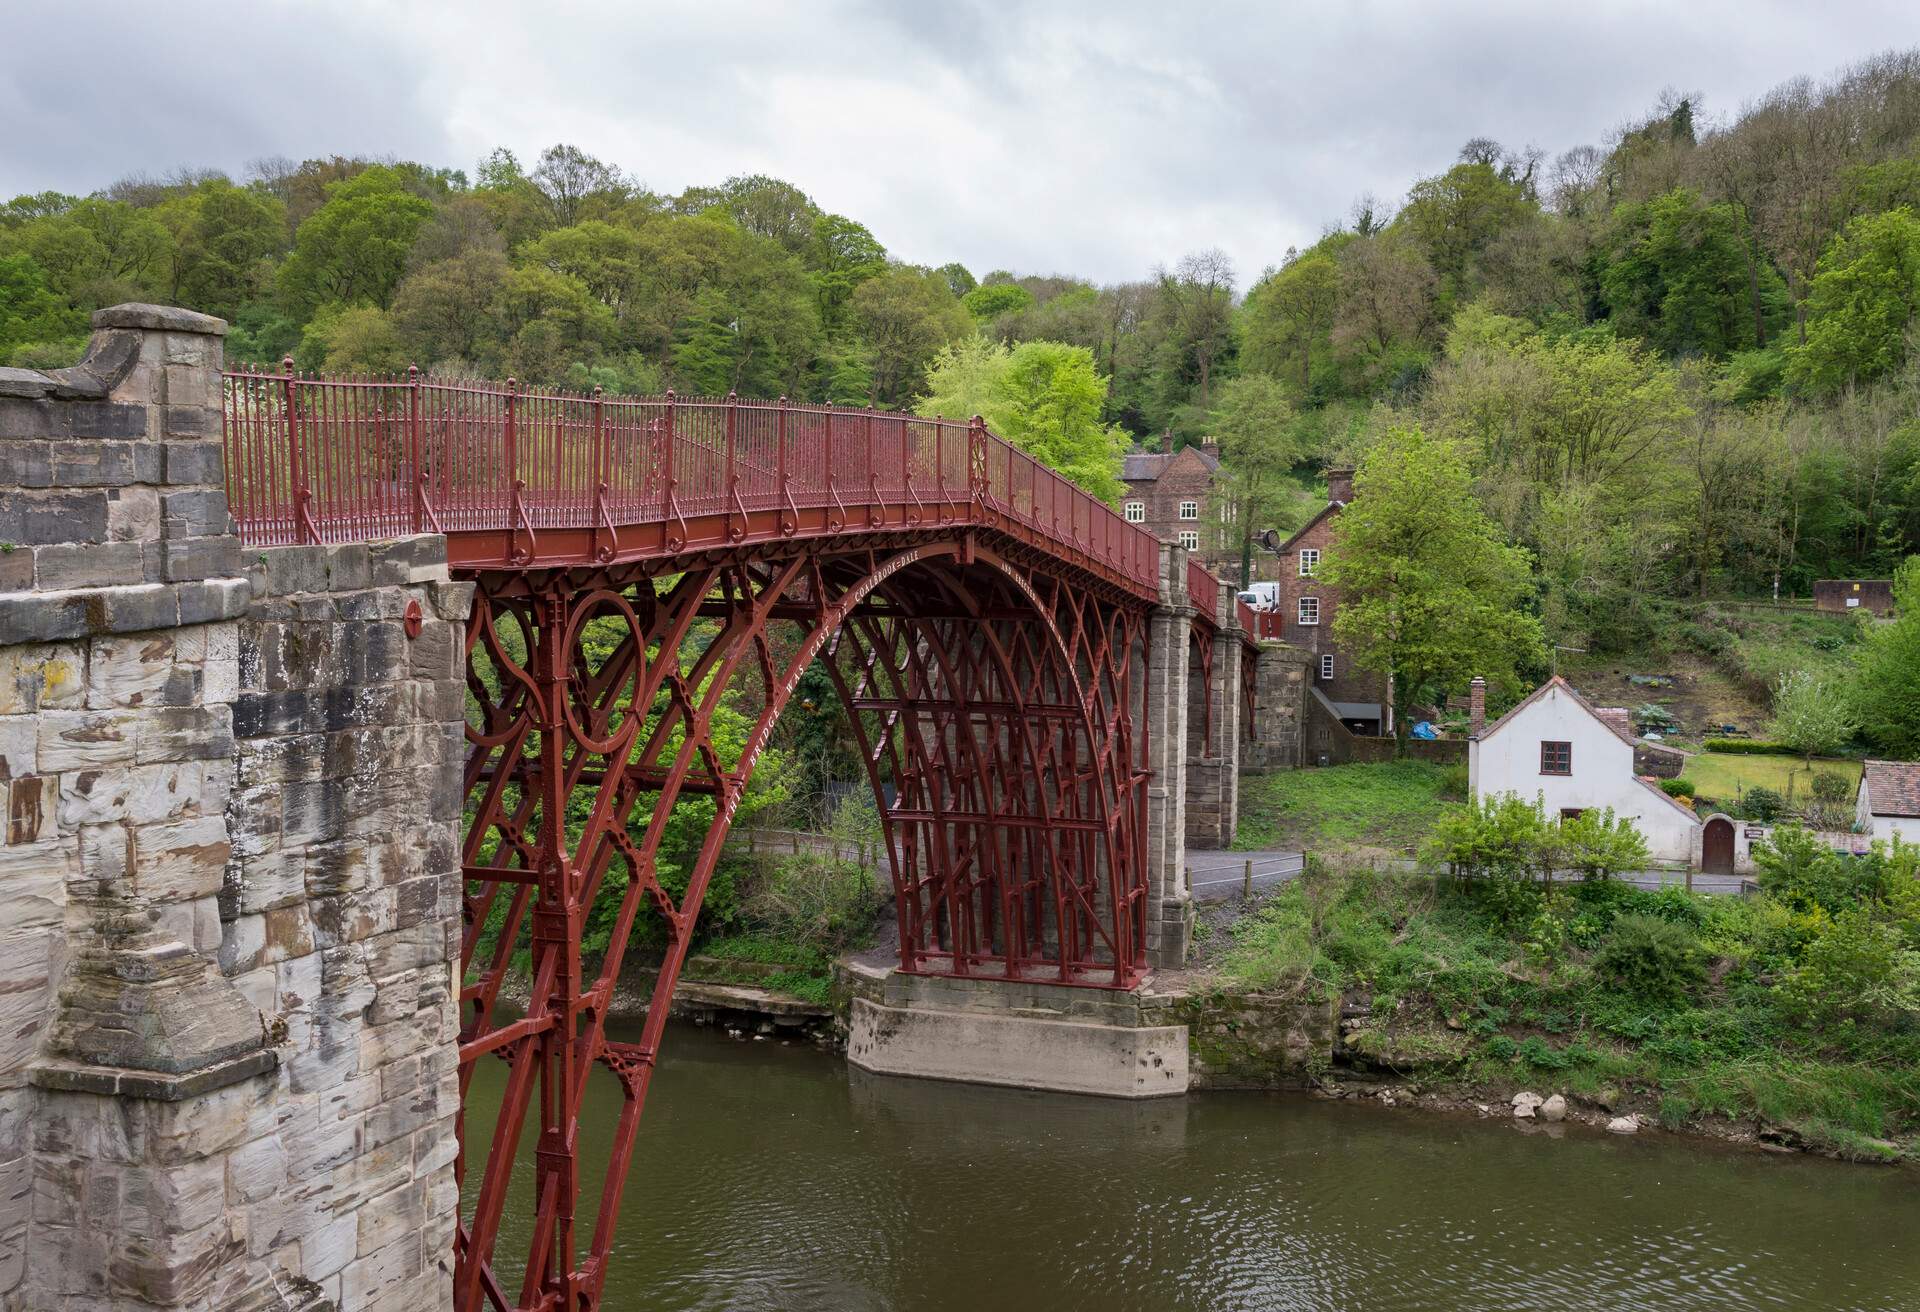 The UNESCO world heritage site of Ironbridge in Shropshire. The famous Iron Bridge is the first of its kind in the world. Built in 1779 it crosses the river Severn. Restored in recent years and painted a shade of deep red.